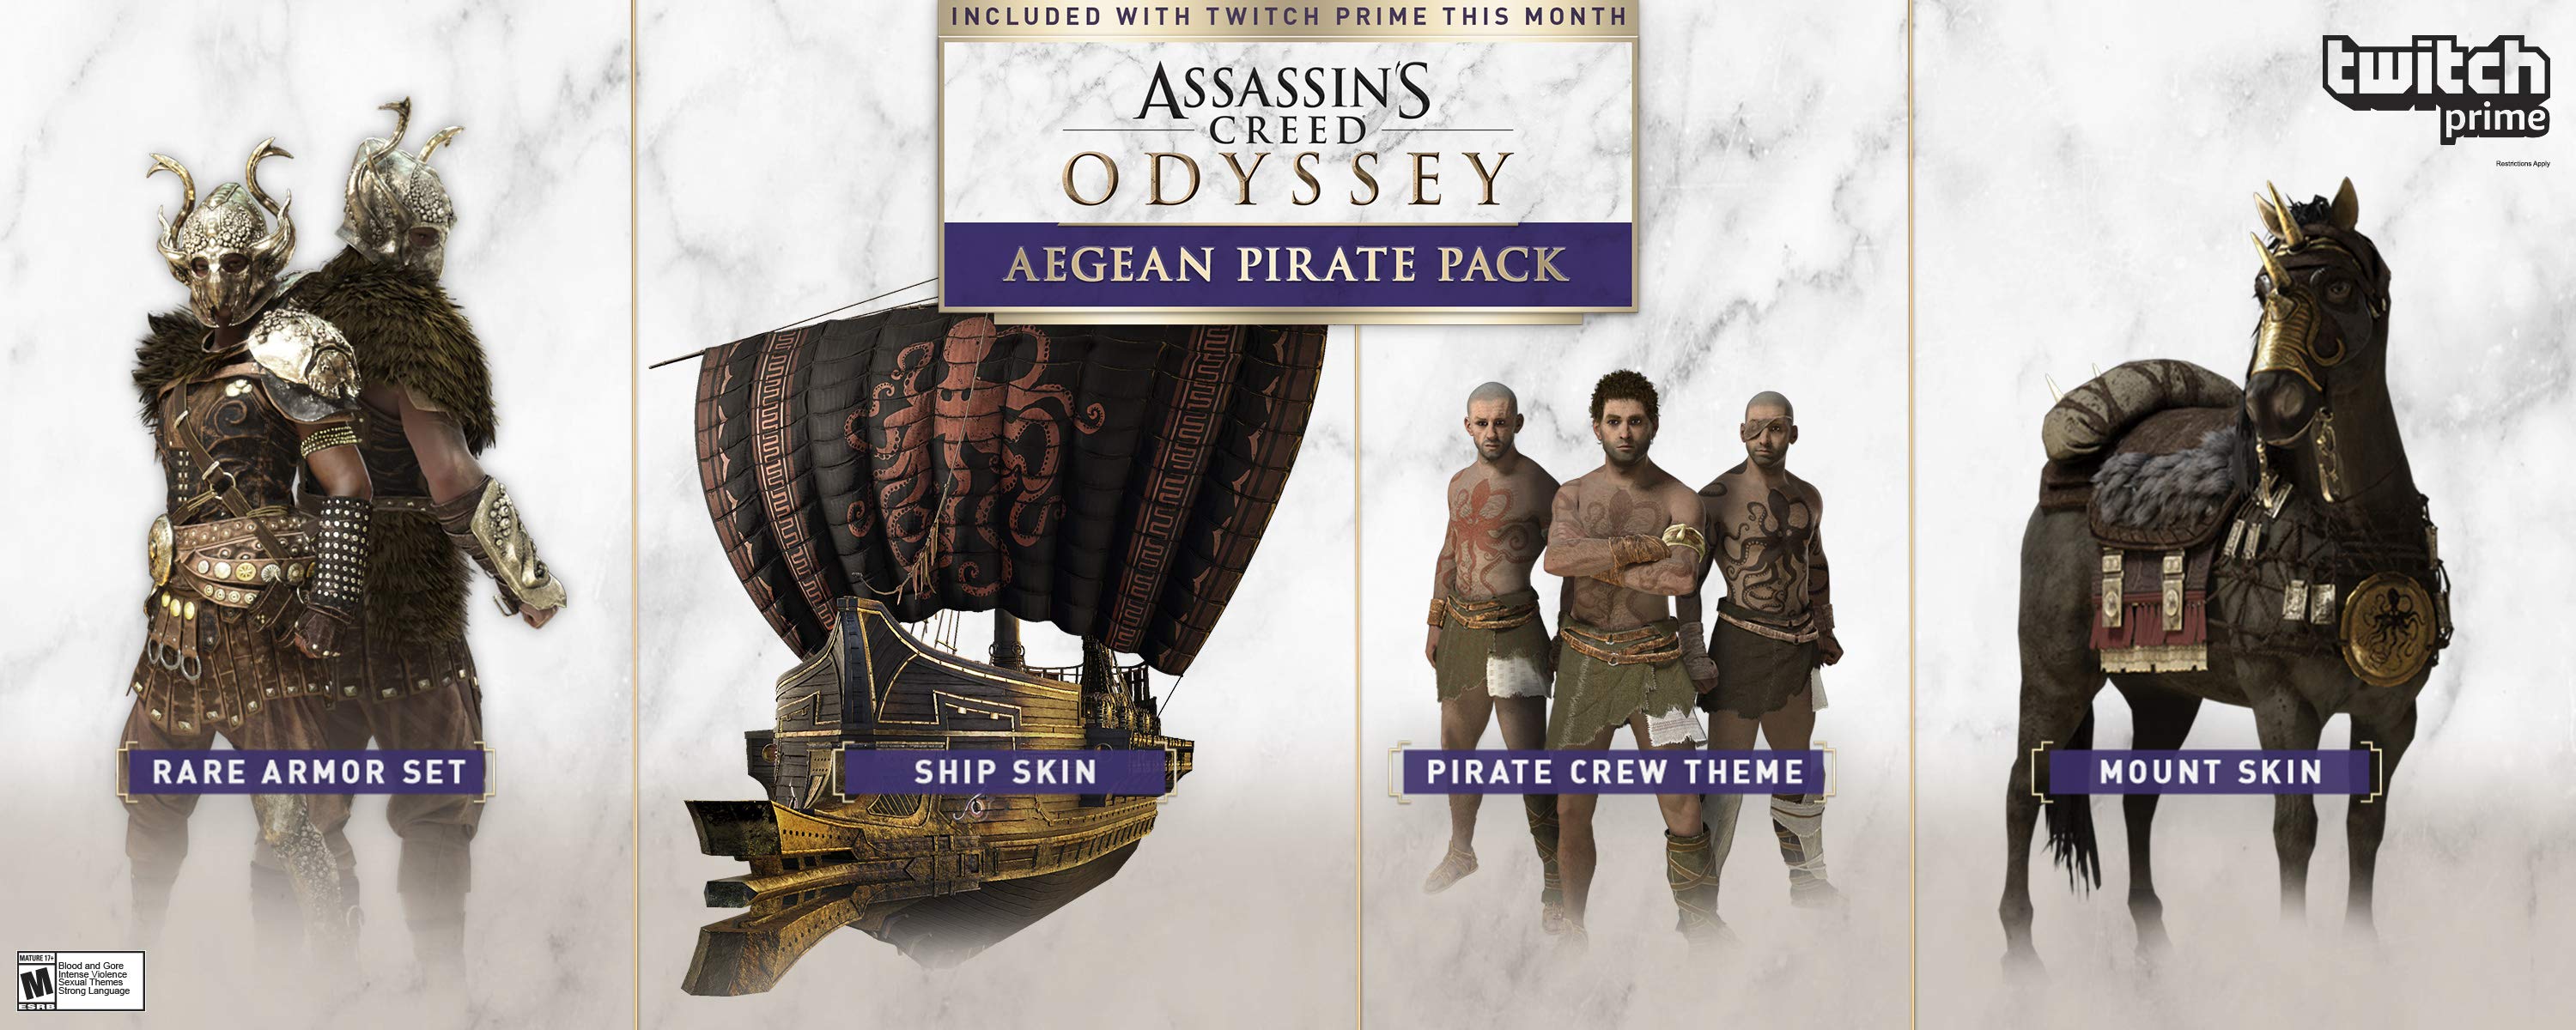 Twitch Prime Assassin’s Creed Odyssey loot features a pirate ship skin and the Atoll Horse Mount